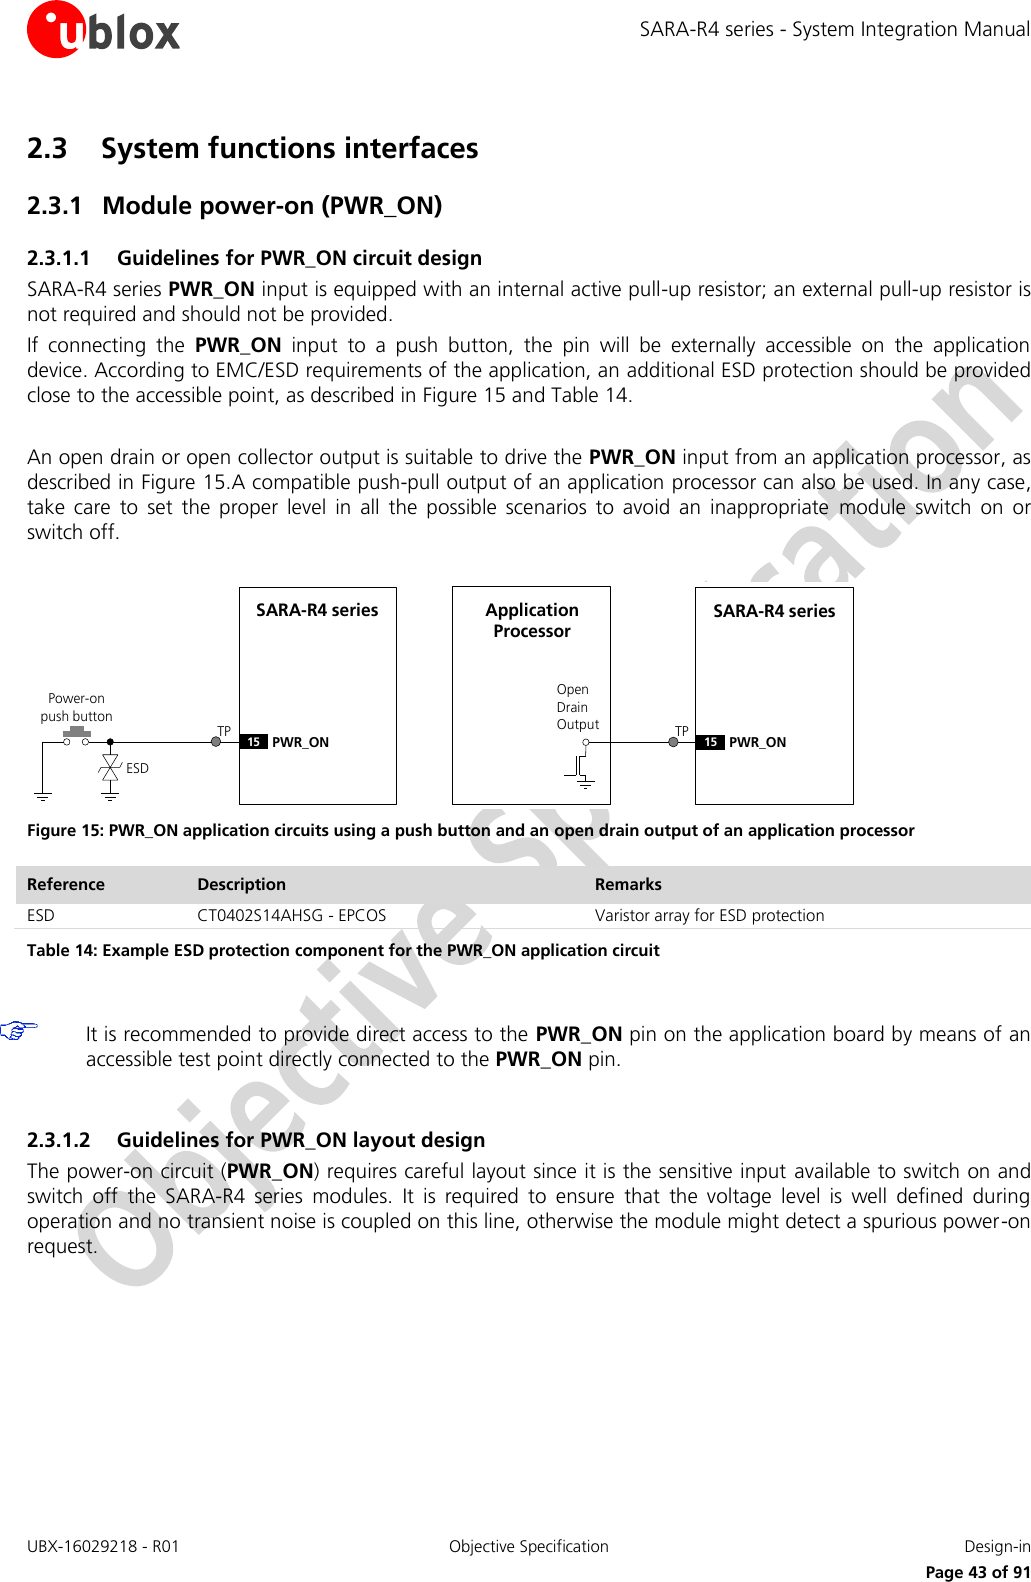 SARA-R4 series - System Integration Manual UBX-16029218 - R01  Objective Specification  Design-in     Page 43 of 91 2.3 System functions interfaces 2.3.1 Module power-on (PWR_ON) 2.3.1.1 Guidelines for PWR_ON circuit design SARA-R4 series PWR_ON input is equipped with an internal active pull-up resistor; an external pull-up resistor is not required and should not be provided.  If  connecting  the  PWR_ON  input  to  a  push  button,  the  pin  will  be  externally  accessible  on  the  application device. According to EMC/ESD requirements of the application, an additional ESD protection should be provided close to the accessible point, as described in Figure 15 and Table 14.  An open drain or open collector output is suitable to drive the PWR_ON input from an application processor, as described in Figure 15.A compatible push-pull output of an application processor can also be used. In any case, take  care  to  set  the  proper  level  in  all  the  possible  scenarios  to  avoid  an  inappropriate  module  switch  on  or switch off.  SARA-R4 series15 PWR_ONPower-on push buttonESDOpen Drain OutputApplication ProcessorSARA-R4 series15 PWR_ONTP TP Figure 15: PWR_ON application circuits using a push button and an open drain output of an application processor Reference Description Remarks ESD CT0402S14AHSG - EPCOS Varistor array for ESD protection Table 14: Example ESD protection component for the PWR_ON application circuit   It is recommended to provide direct access to the PWR_ON pin on the application board by means of an accessible test point directly connected to the PWR_ON pin.  2.3.1.2 Guidelines for PWR_ON layout design The power-on circuit (PWR_ON) requires careful layout since it is the sensitive input  available to switch on and switch  off  the  SARA-R4  series  modules.  It  is  required  to  ensure  that  the  voltage  level  is  well  defined  during operation and no transient noise is coupled on this line, otherwise the module might detect a spurious power-on request.  